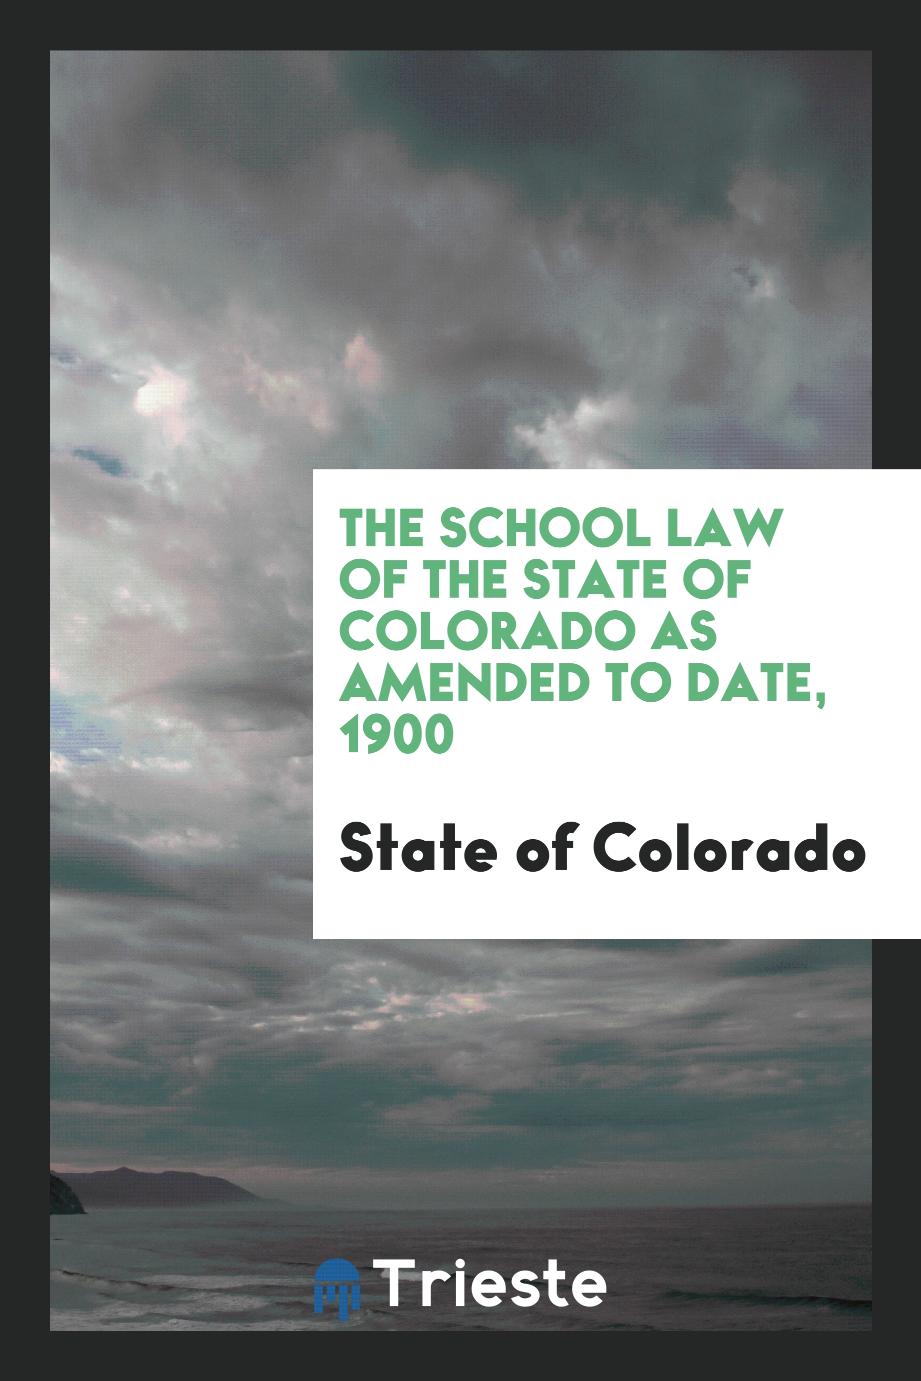 The School Law of the State of Colorado as Amended to Date, 1900